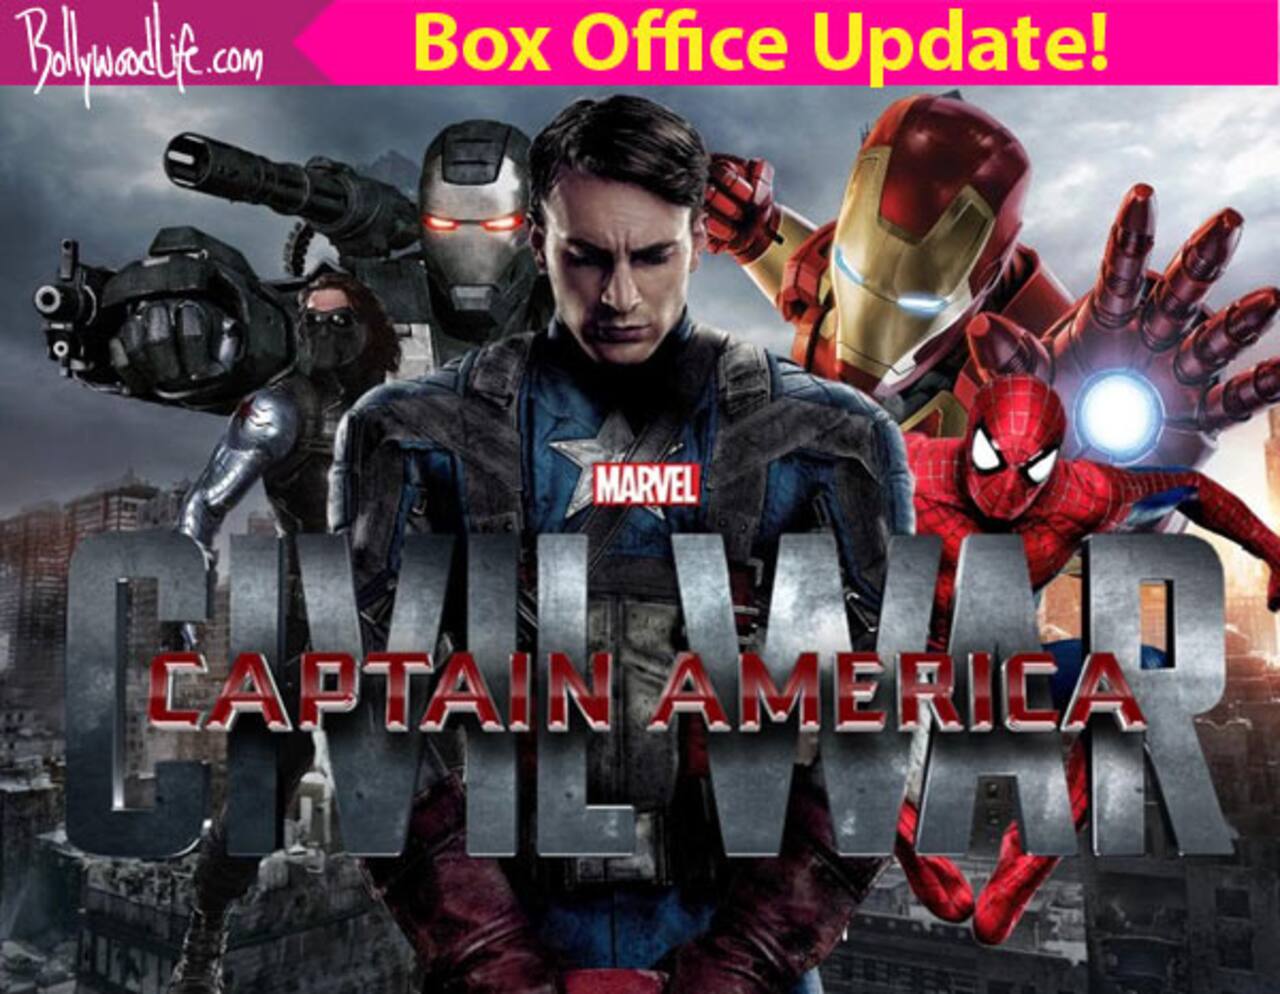 Captain America - Civil War box office collection: Marvel's most  anticipated film rakes in Rs  crores gross on day 1! - Bollywood News  & Gossip, Movie Reviews, Trailers & Videos at 